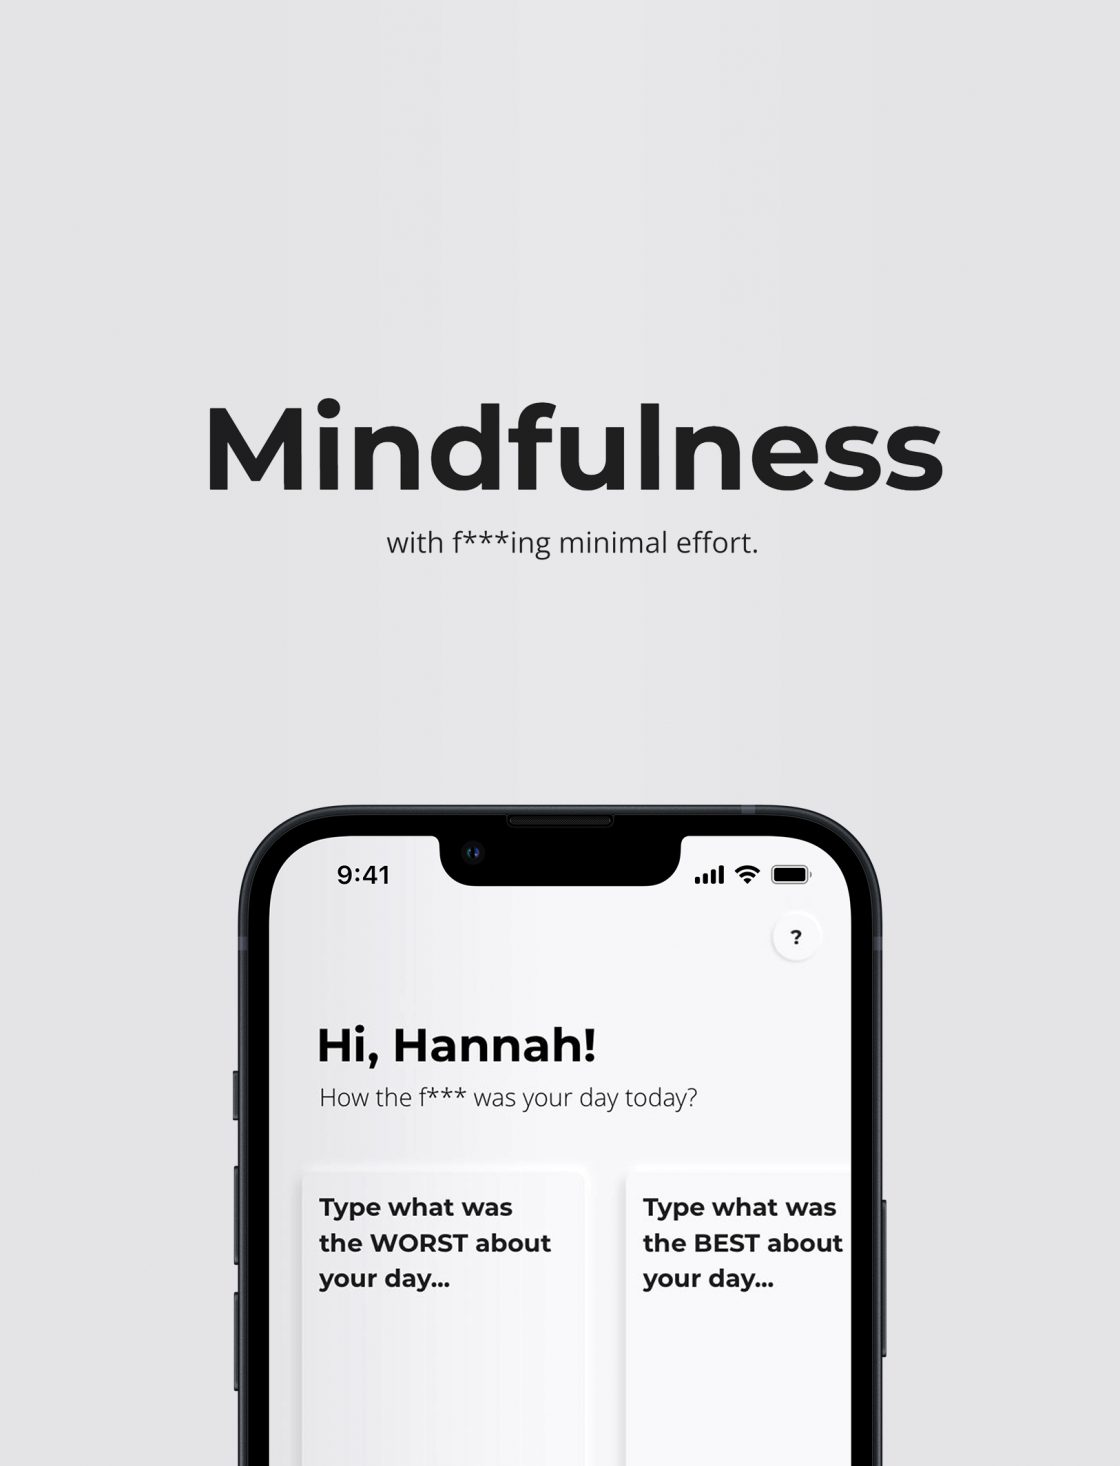 Improving lives by not making another mindfulness app